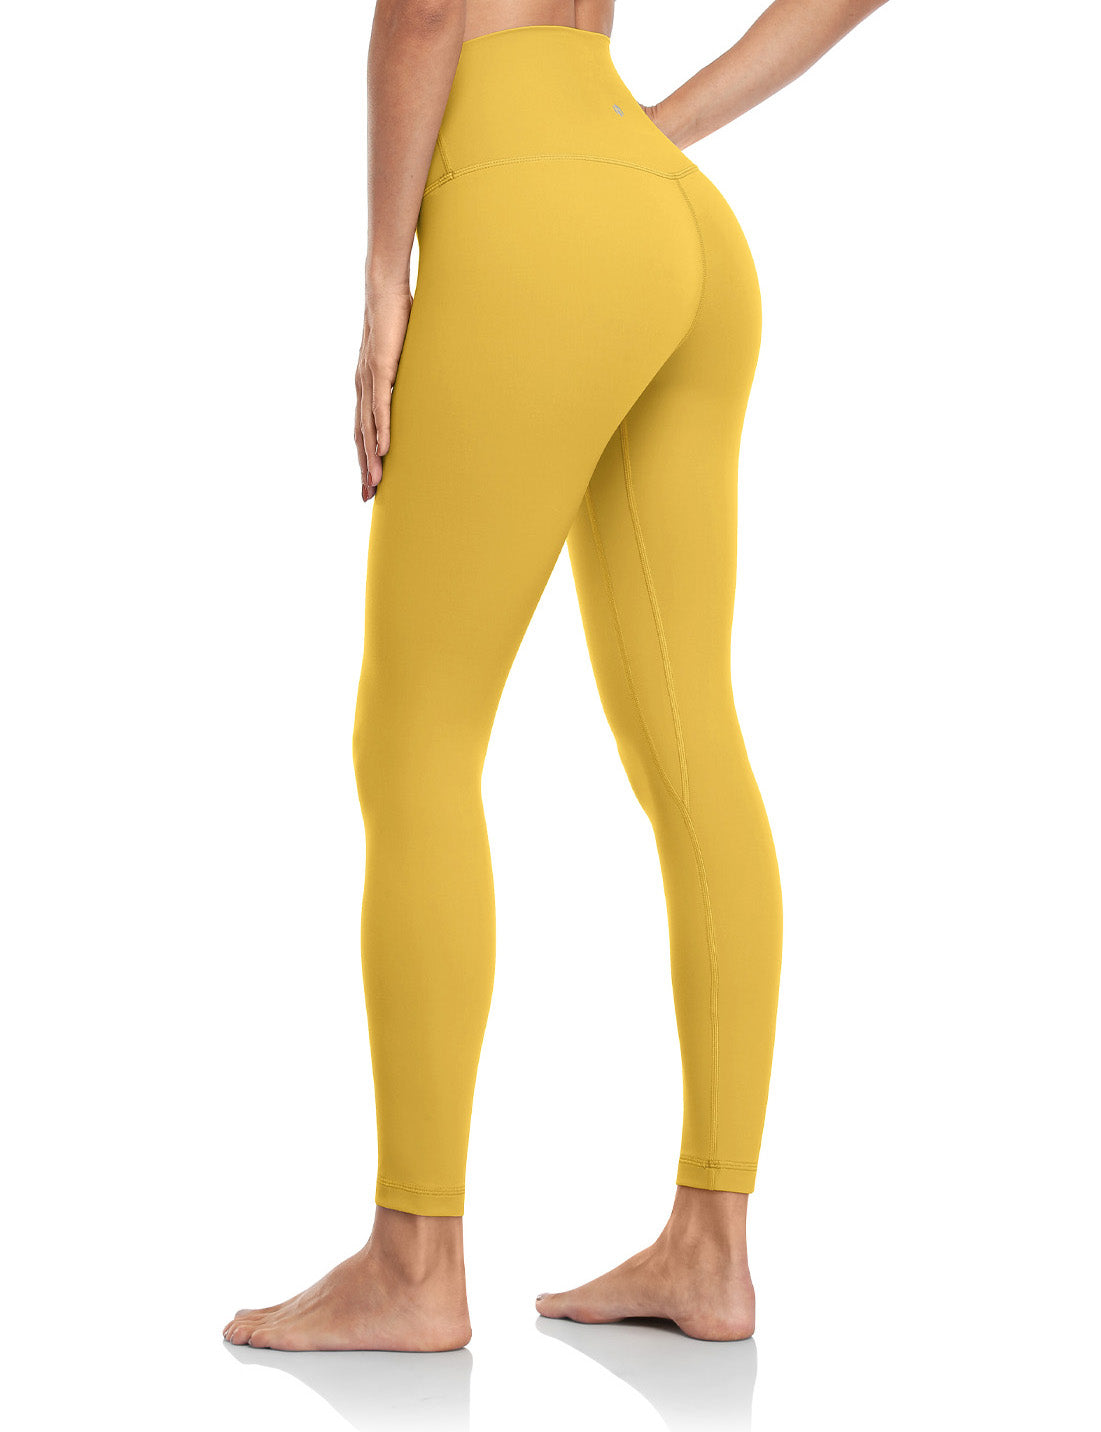  HXSZWJJ Fitness Female Full Length Leggings Running Pants  Comfortable and Formfitting Yoga Pants Good Elasticity (Color : Yellow,  Size : M.) : Clothing, Shoes & Jewelry